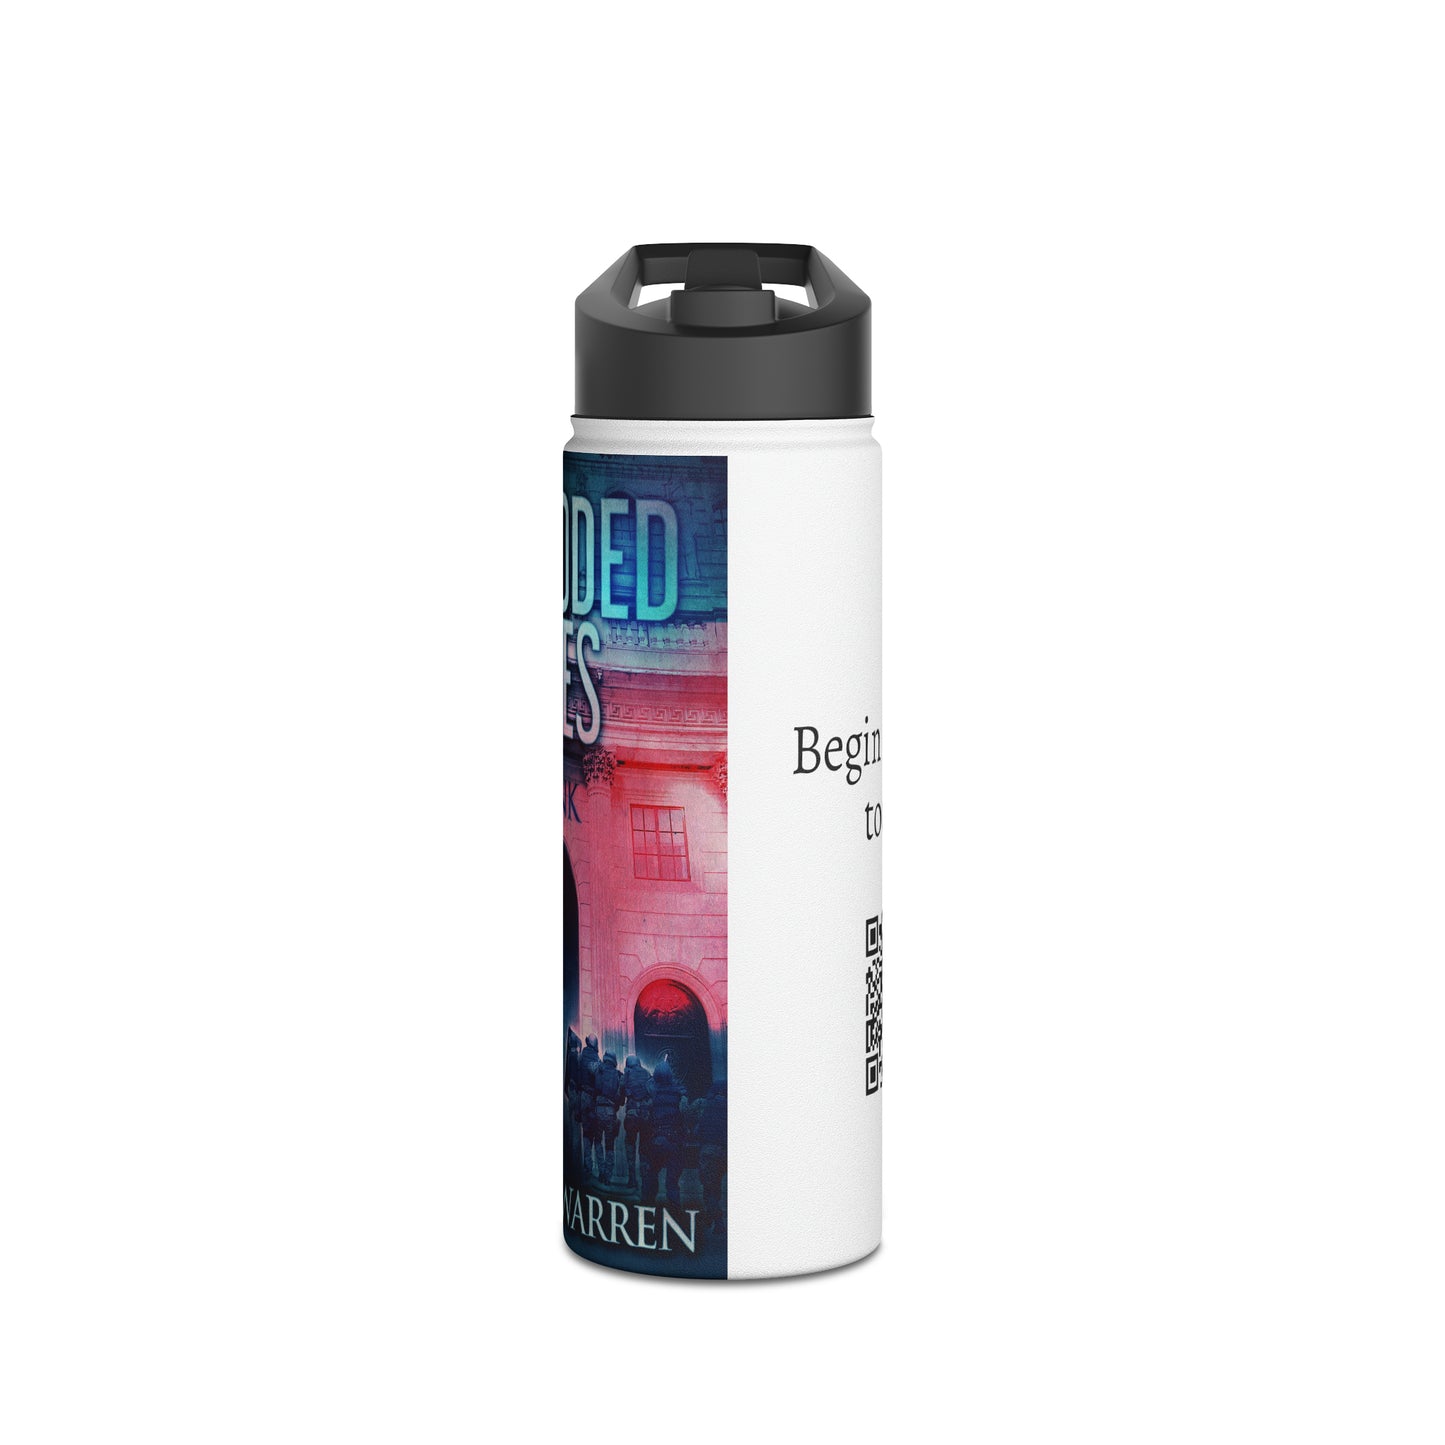 Imploded Lives - Stainless Steel Water Bottle